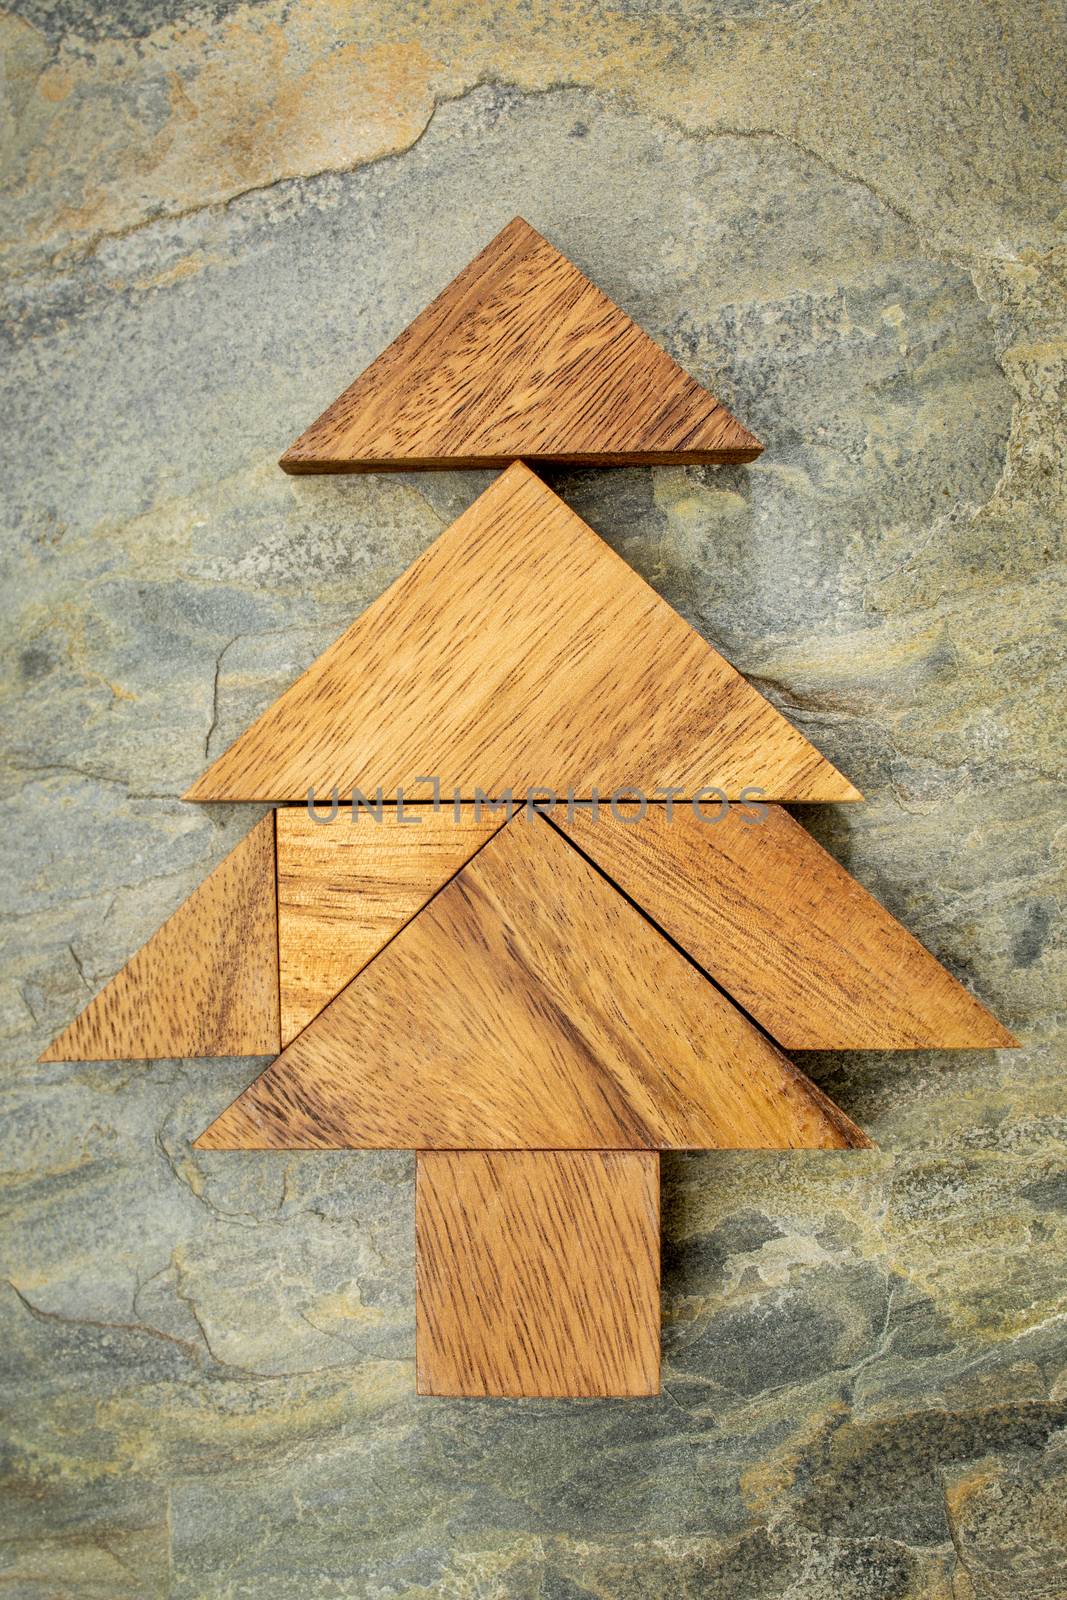 abstract picture of a Christmas tree built from seven tangram wooden pieces over a slate rock background, Christmas holiday concept, artwork created by the photographer